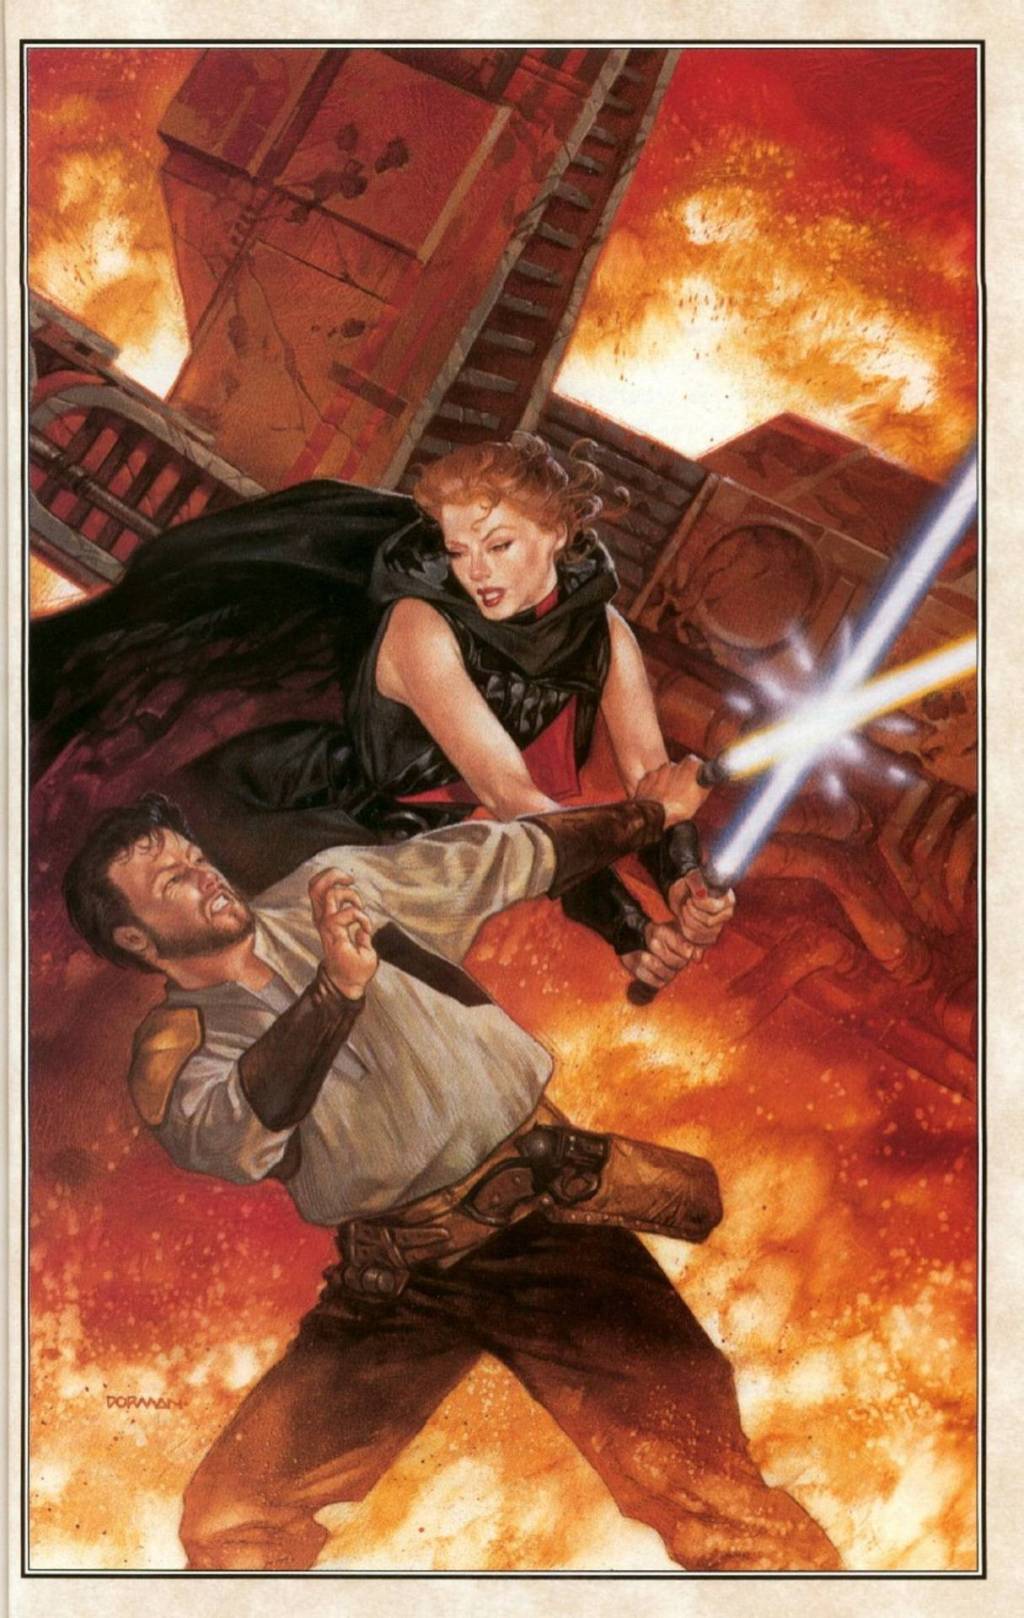 Kyle Katarn comes to blows with Sariss on Dave Dorman's key art for Star Wars: Jedi Knight: Dark Forces II (1997), LucasArts
